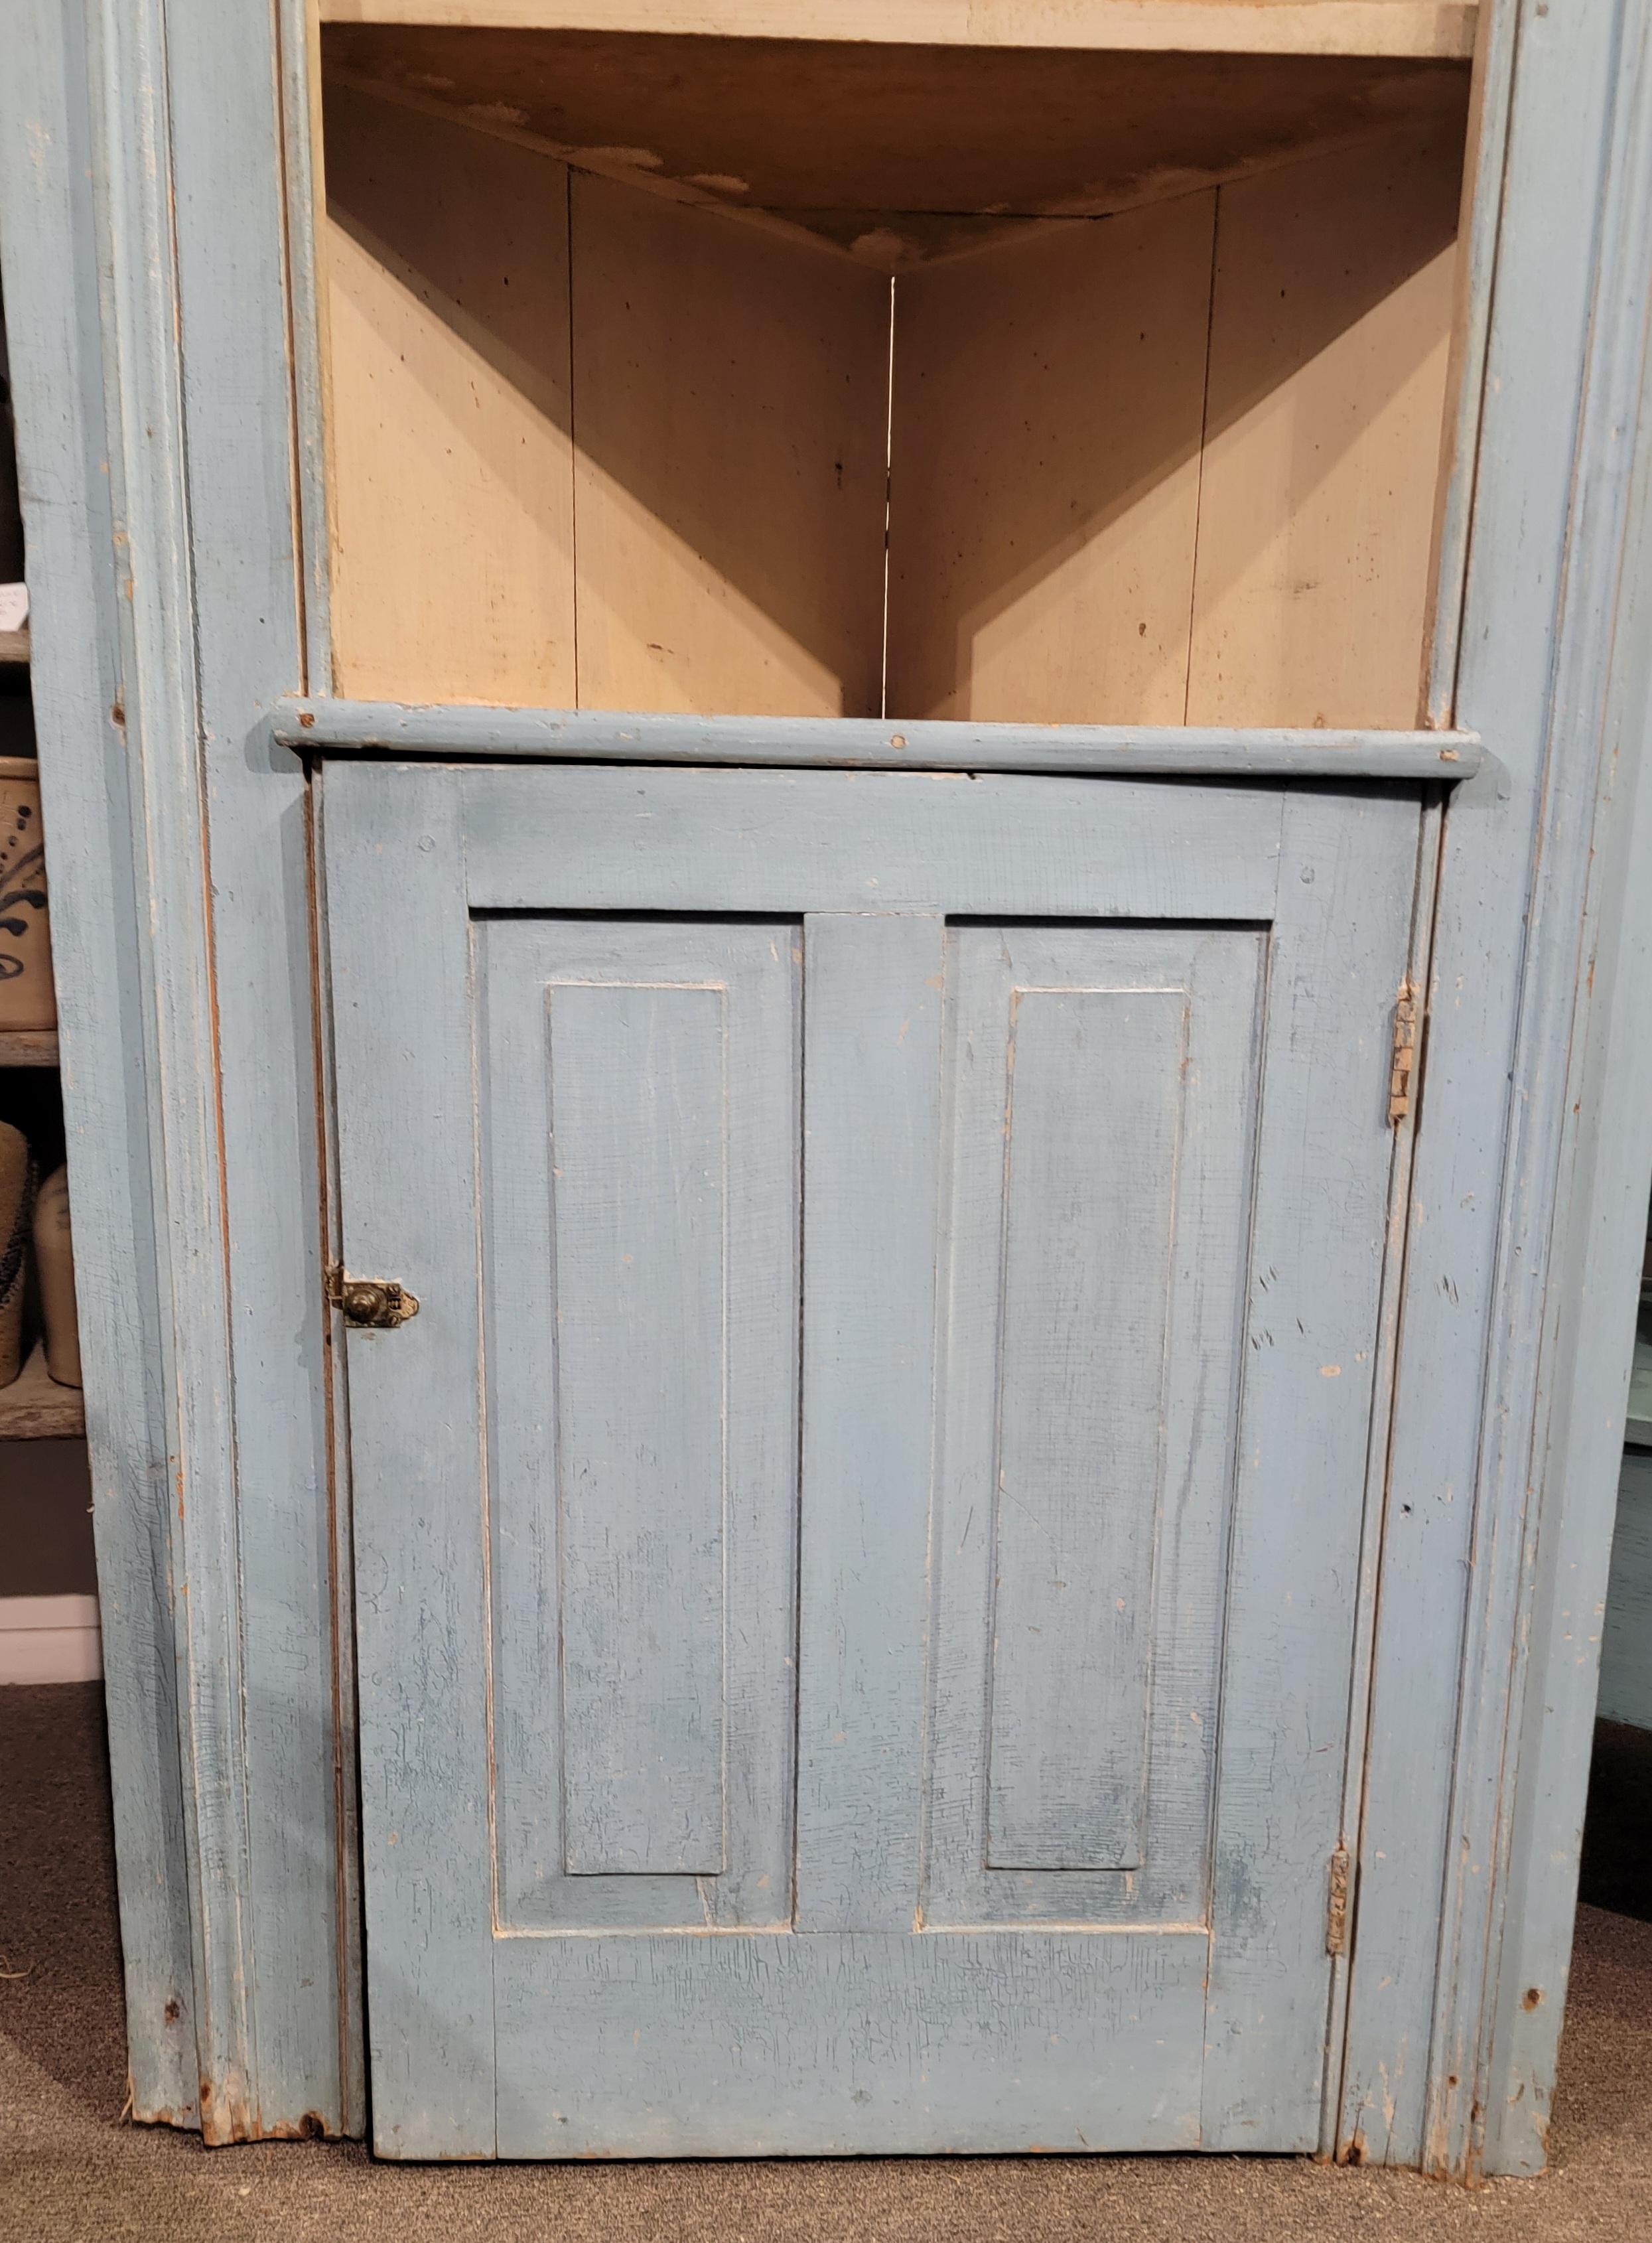 18Thc Original powder blue paneled narrow corner cupboard with picture frame molding.The original cram colored interior original painted interior is undisturbed and amazing patina.The construction is wood pegs and early cut nails.